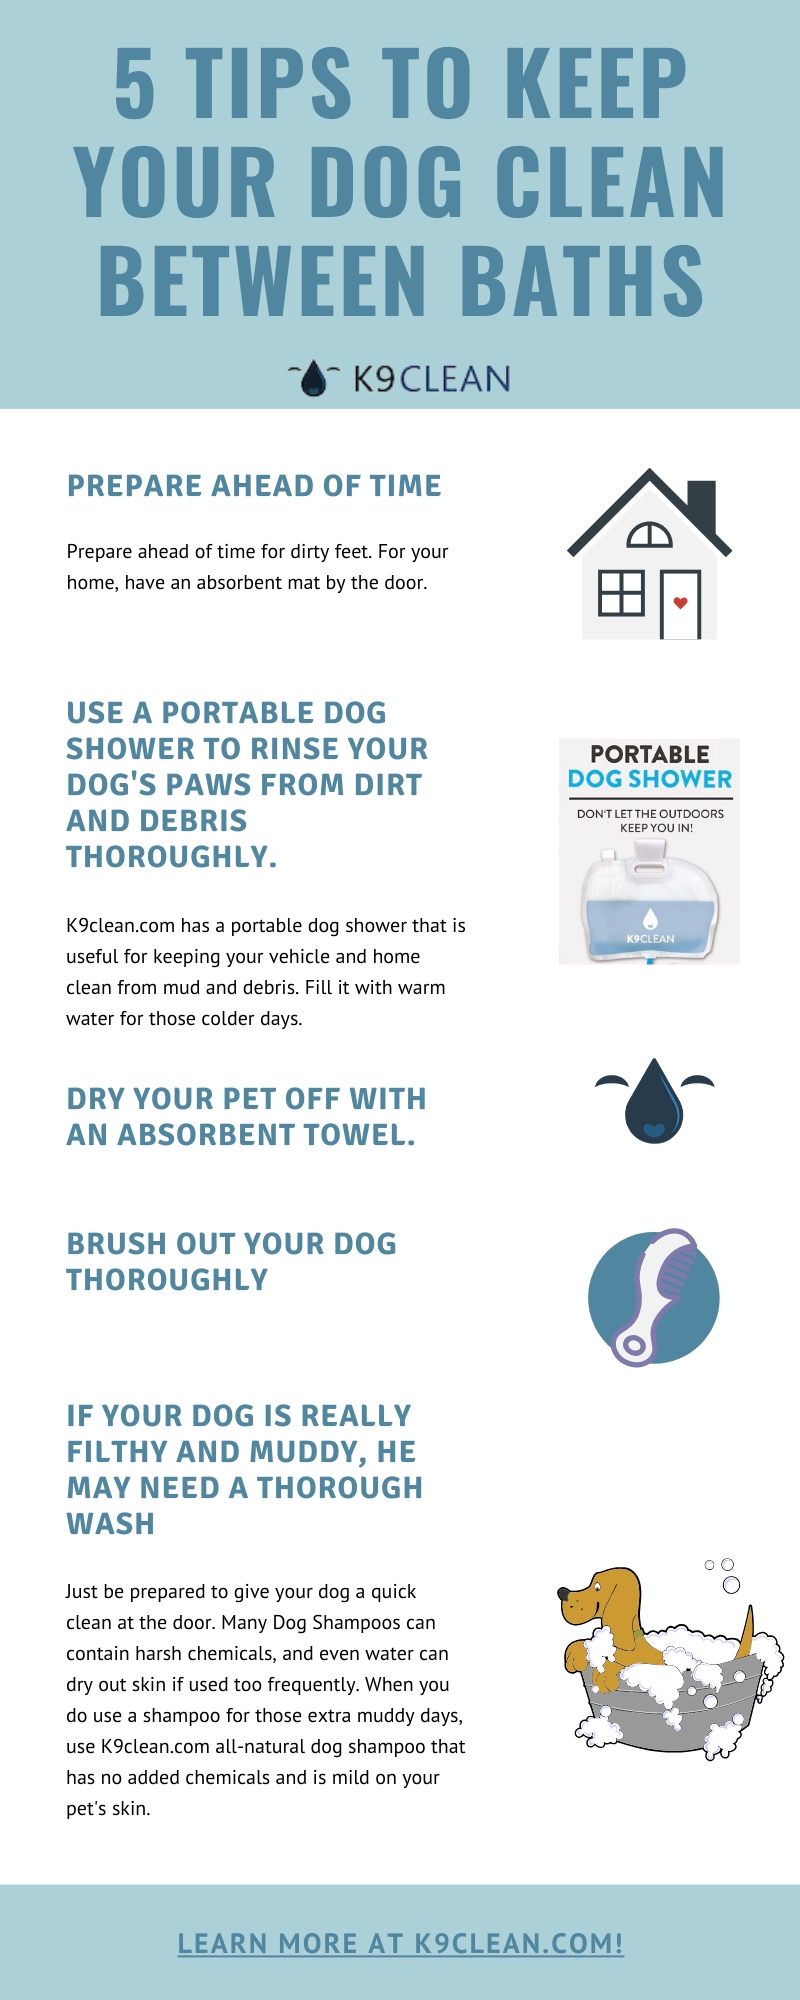 5 Tips on Keeping your Dog Clean between Baths - K9Clean